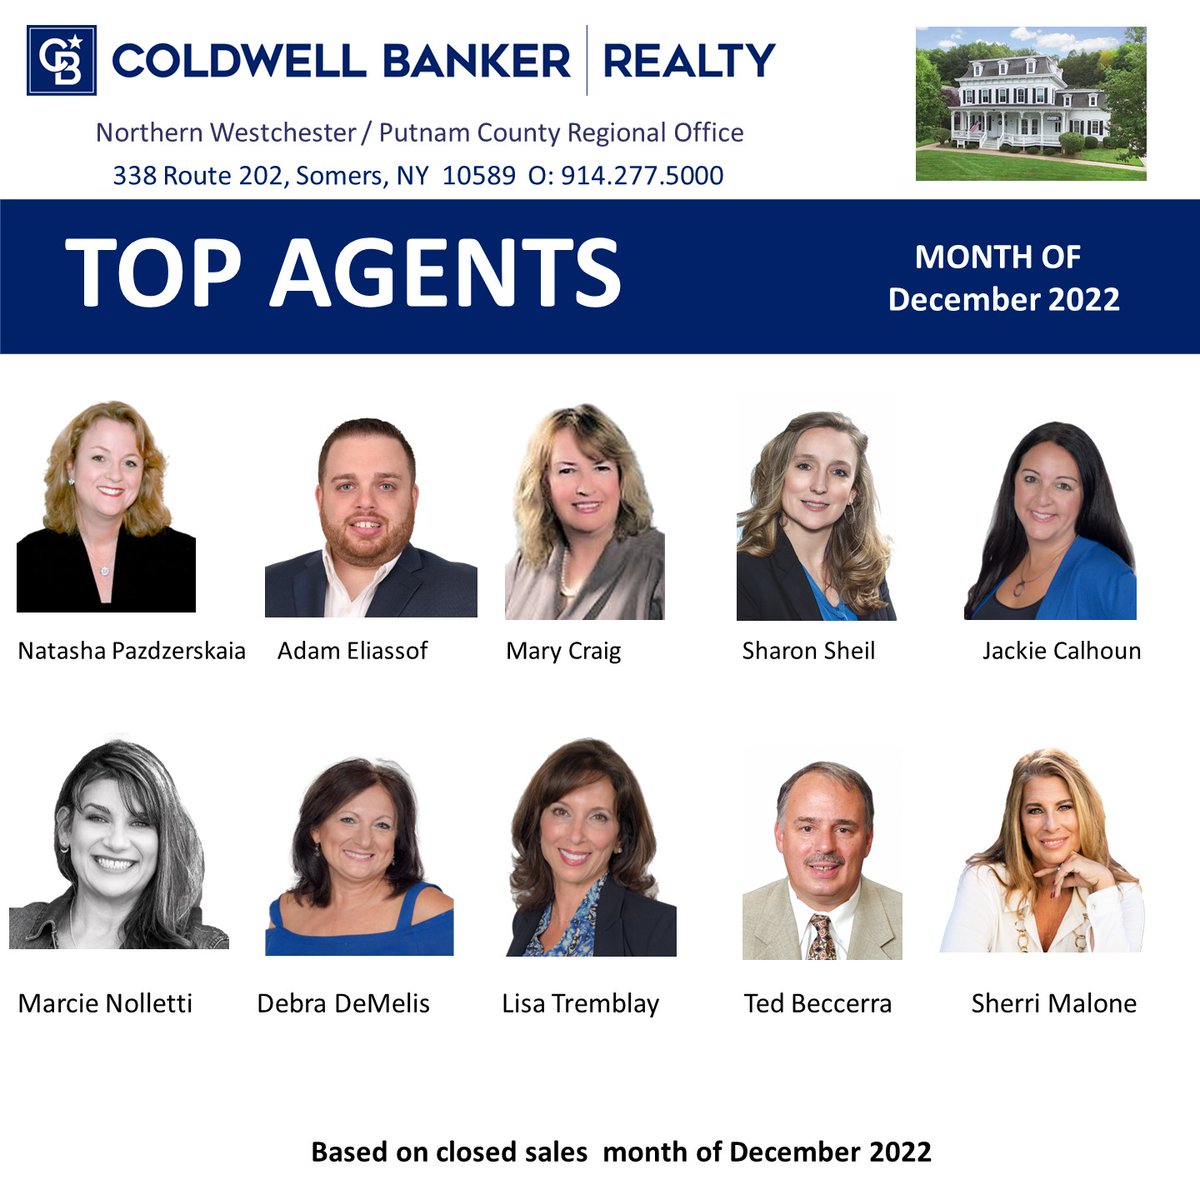 Top Agents - Northern Westchester | Putnam County Regional Office - Congratulations!
.
.
.
#coldwellbankerrealty #realestatesales #topagents #thebestinthebusiness #westchester #putnam #dutchess